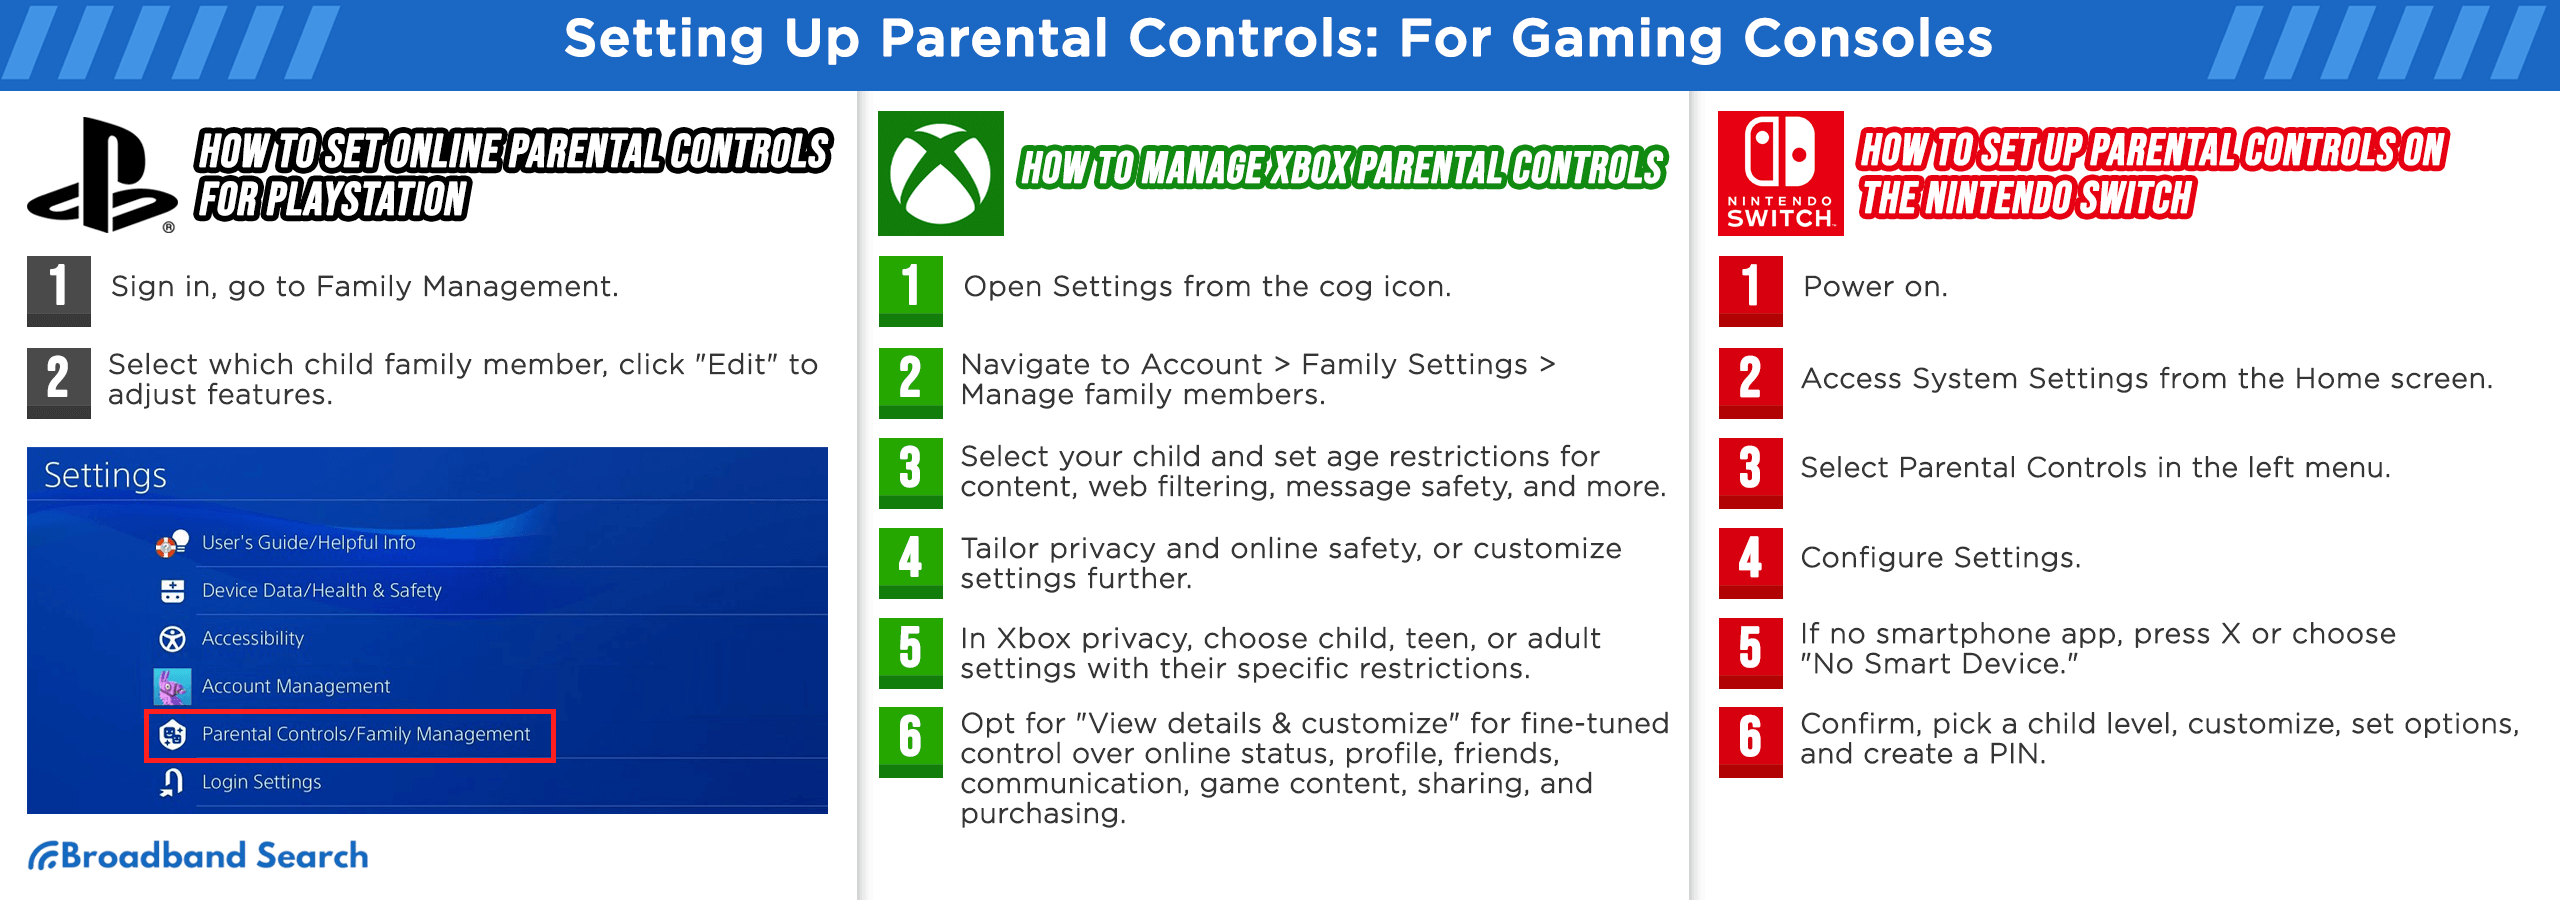 Steps on setting up screen time for gaming consoles like playstation, xbox, and Nintendo